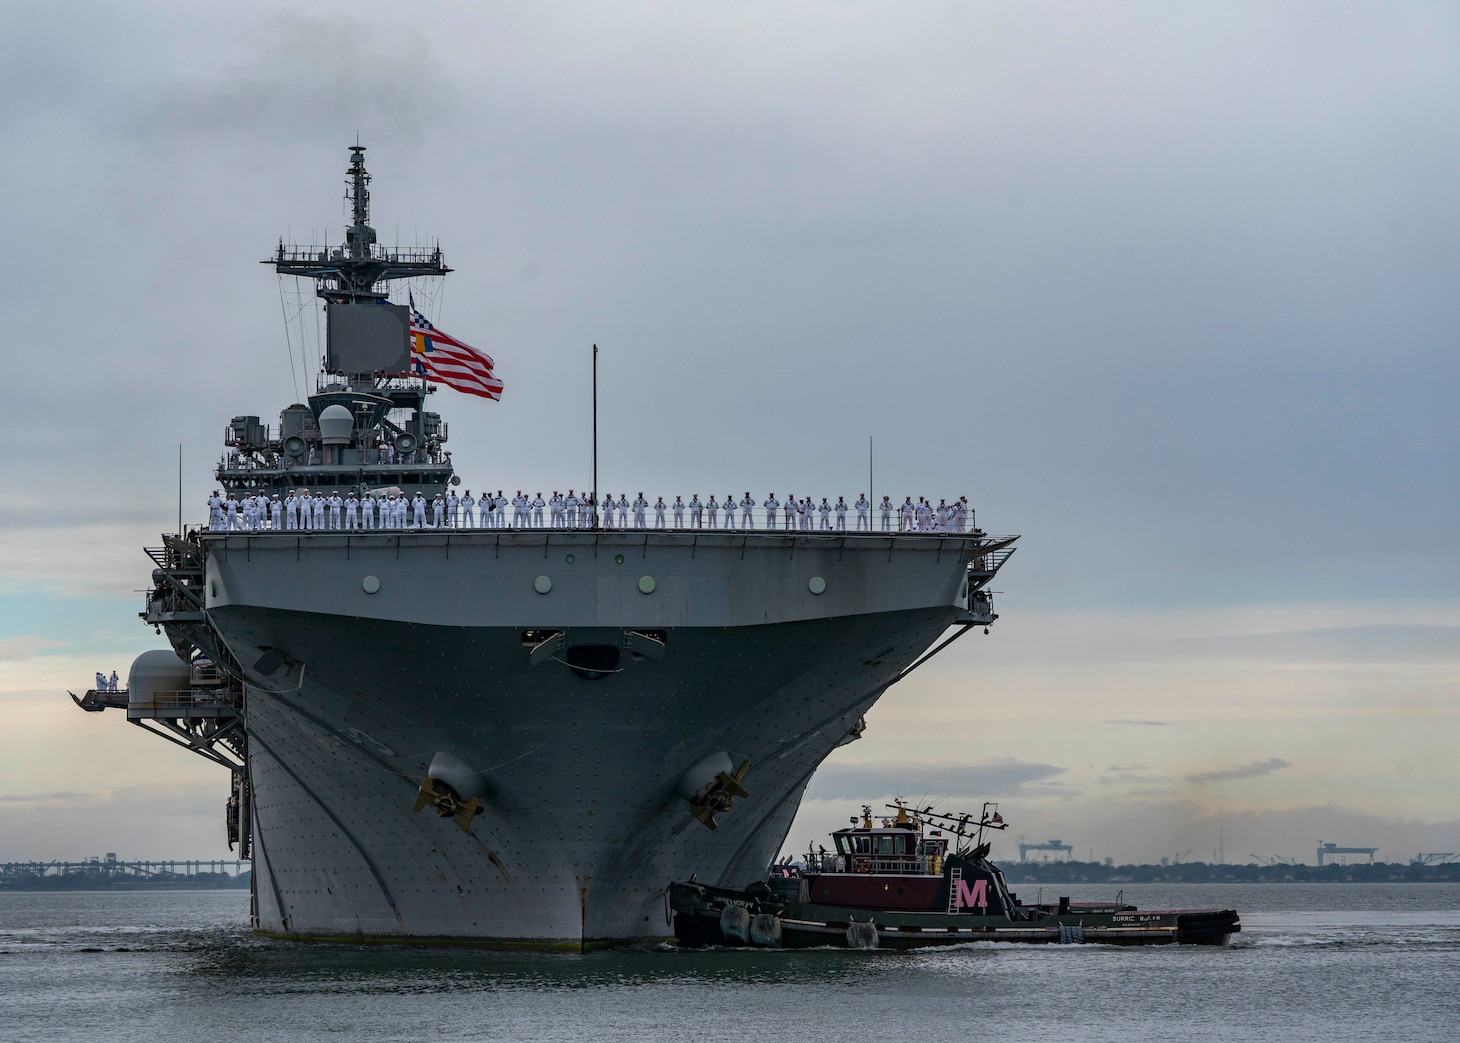 NORFOLK (Oct. 13, 2022) – The Wasp-class amphibious assault ship USS Kearsarge (LHD 3), returns to Naval Station Norfolk after a seven-month deployment, Oct. 13. More than 4,000 Sailors and Marines assigned to the Kearsarge Amphibious Ready Group (ARG) supported a wide range of interoperability opportunities and exercises across the U.S. Sixth Fleet area of operations increasing combat readiness and crisis response capabilities while strengthening relationships with both NATO Allies and partners. (U.S. Navy Photo by Mass Communication Specialist 2nd Class Nathan T. Beard)